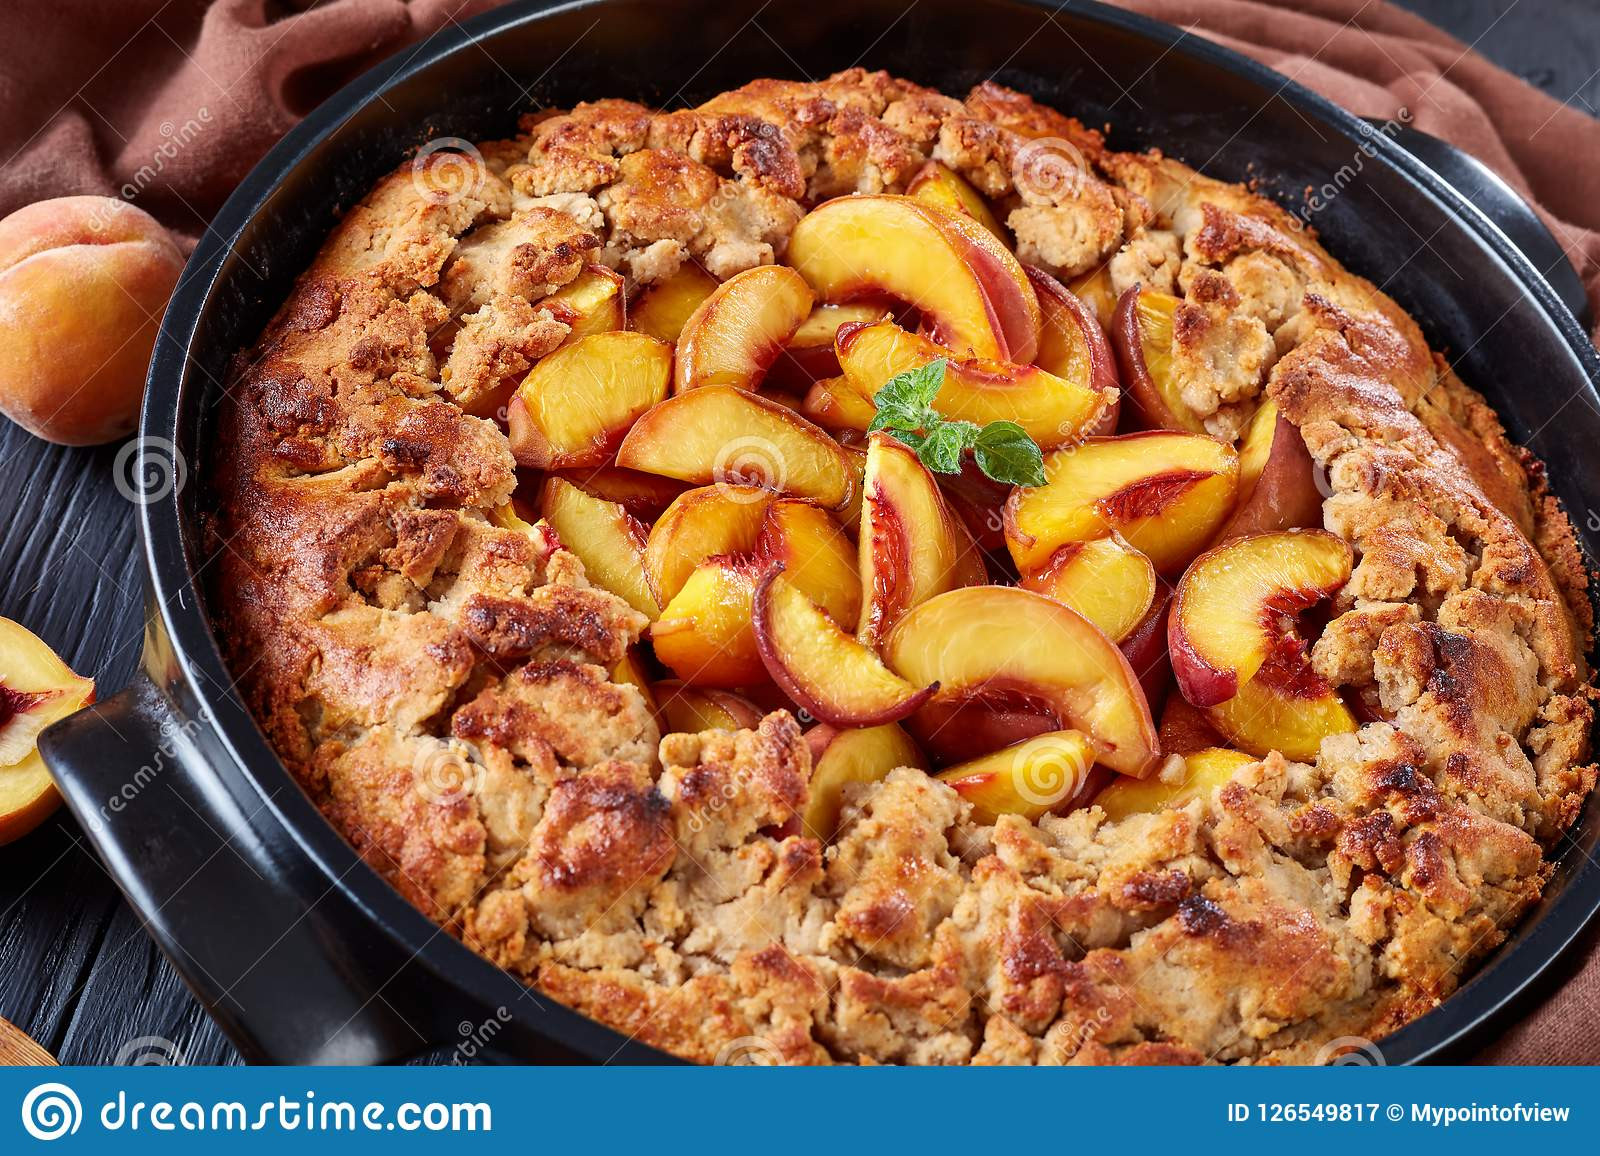 Black Southern Peach Cobbler
 Oven Baked Southern Peach Cobbler In A Black Dish Stock